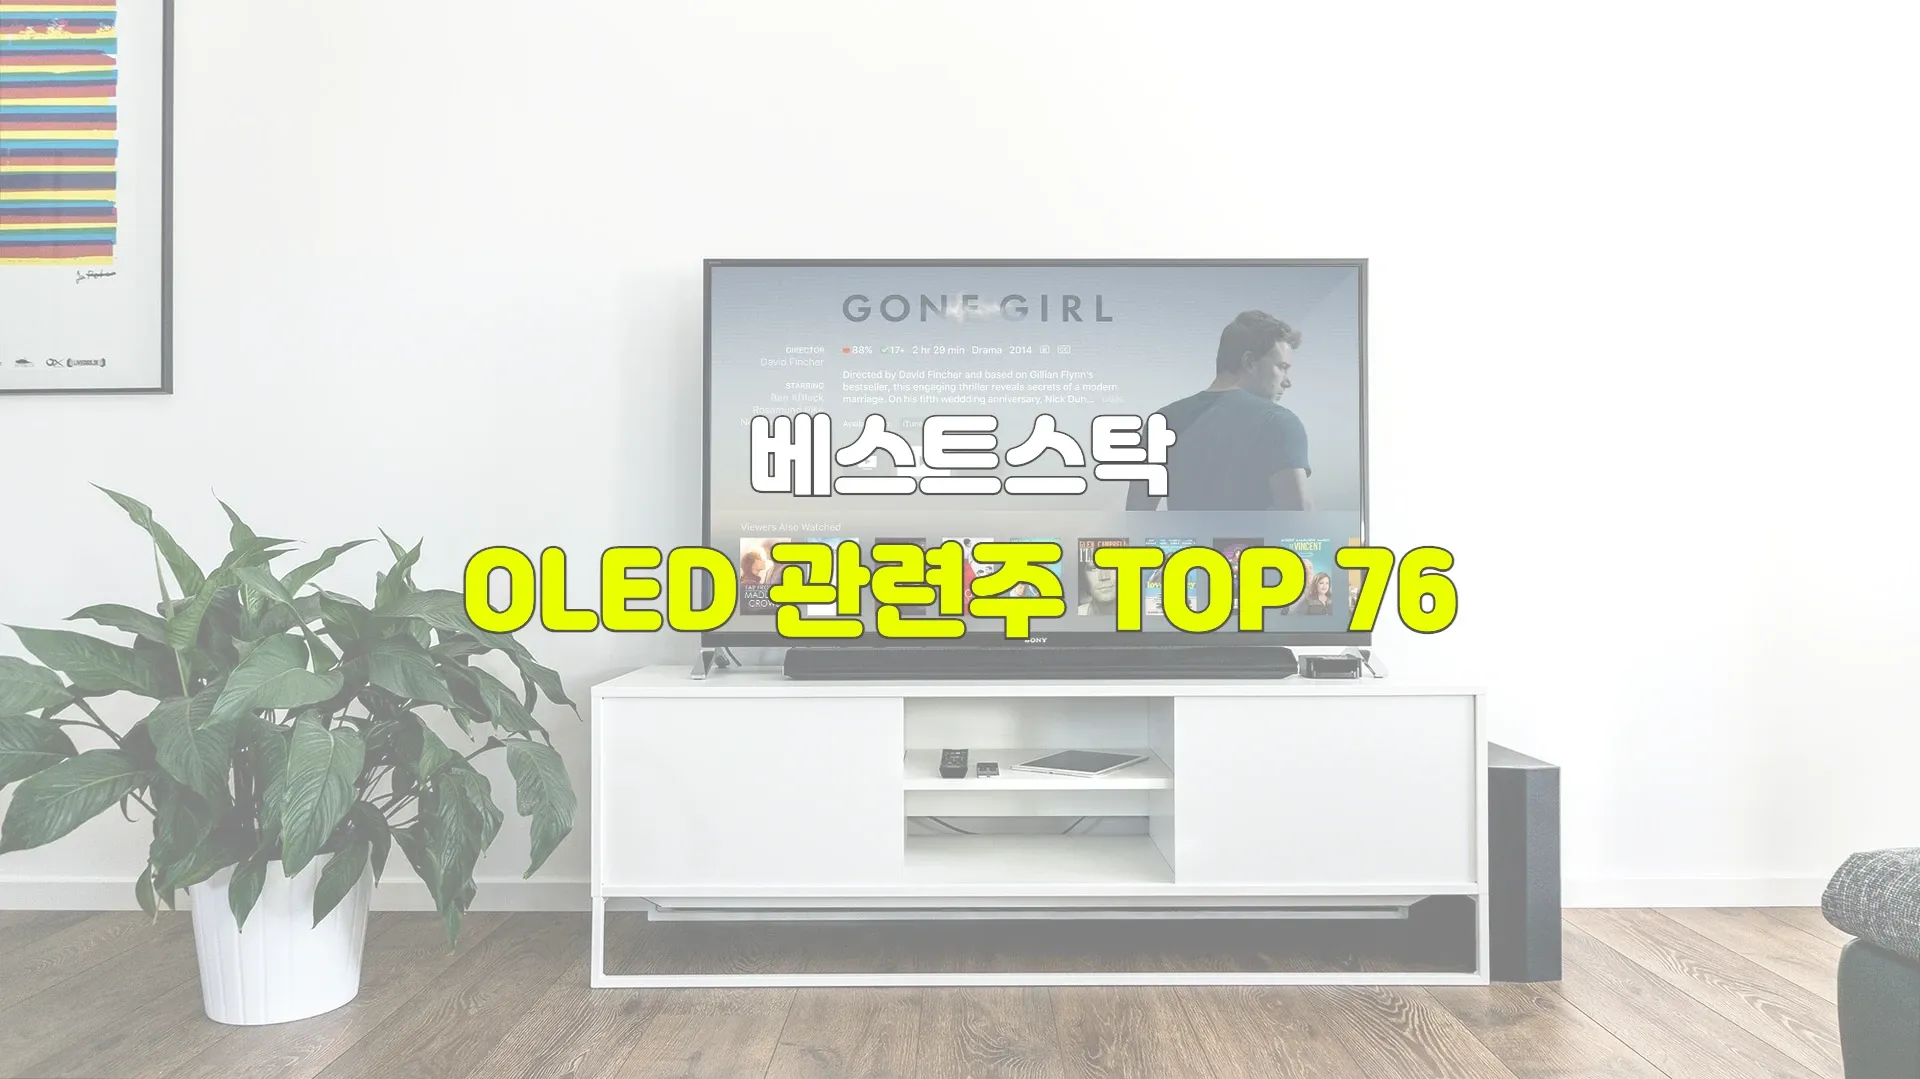 OLED 관련주 TOP 76 썸네일